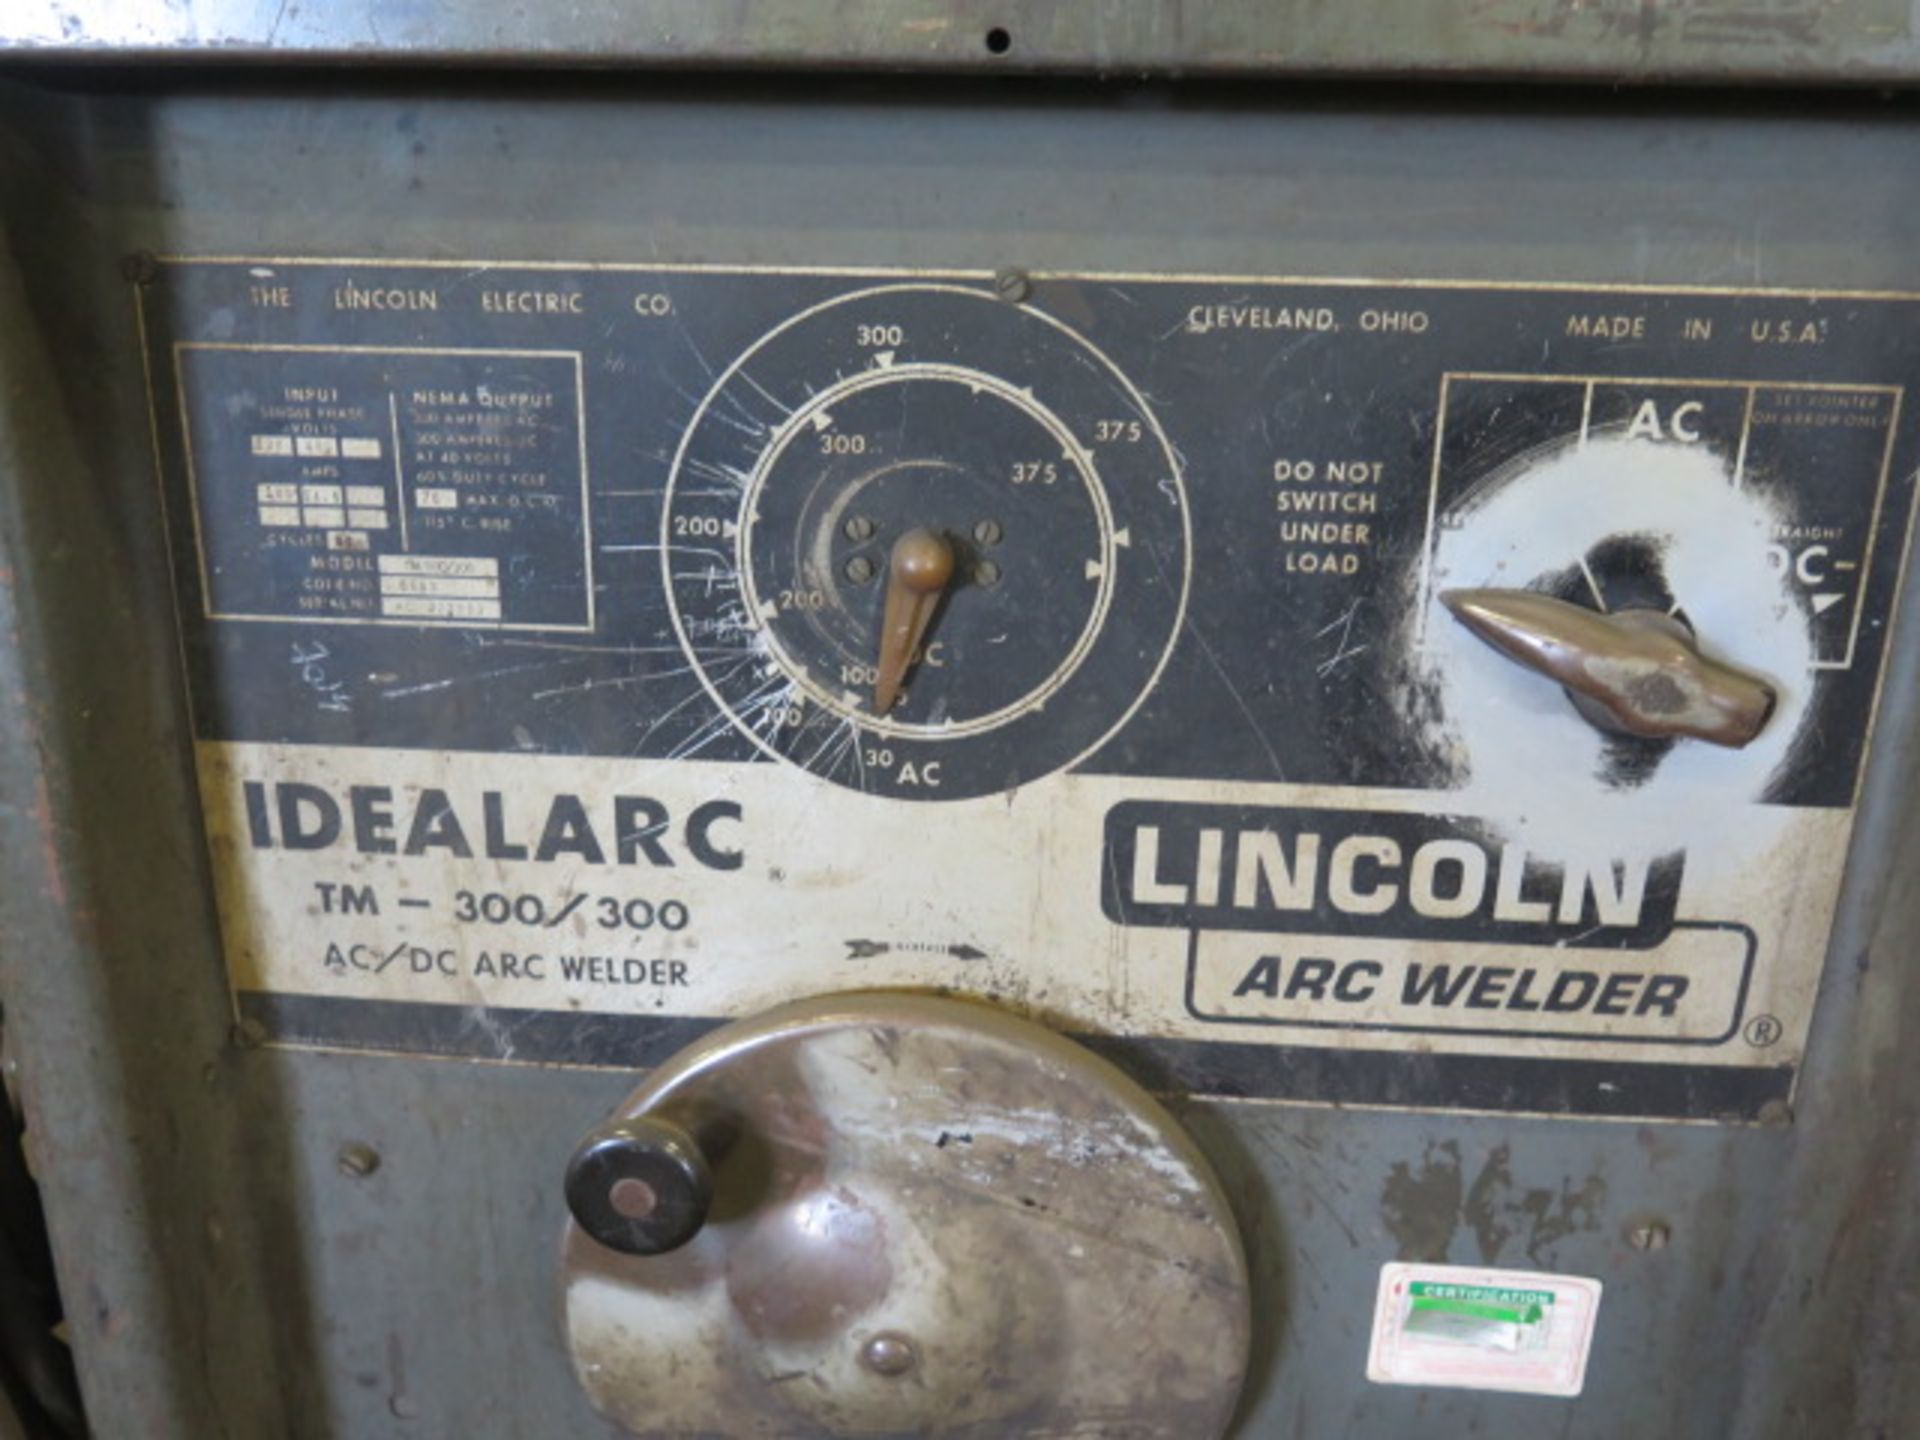 Lincoln Idealarc TM-300/300 AC/DC Arc Welding Power Source s/n AC-322983 - Image 3 of 4